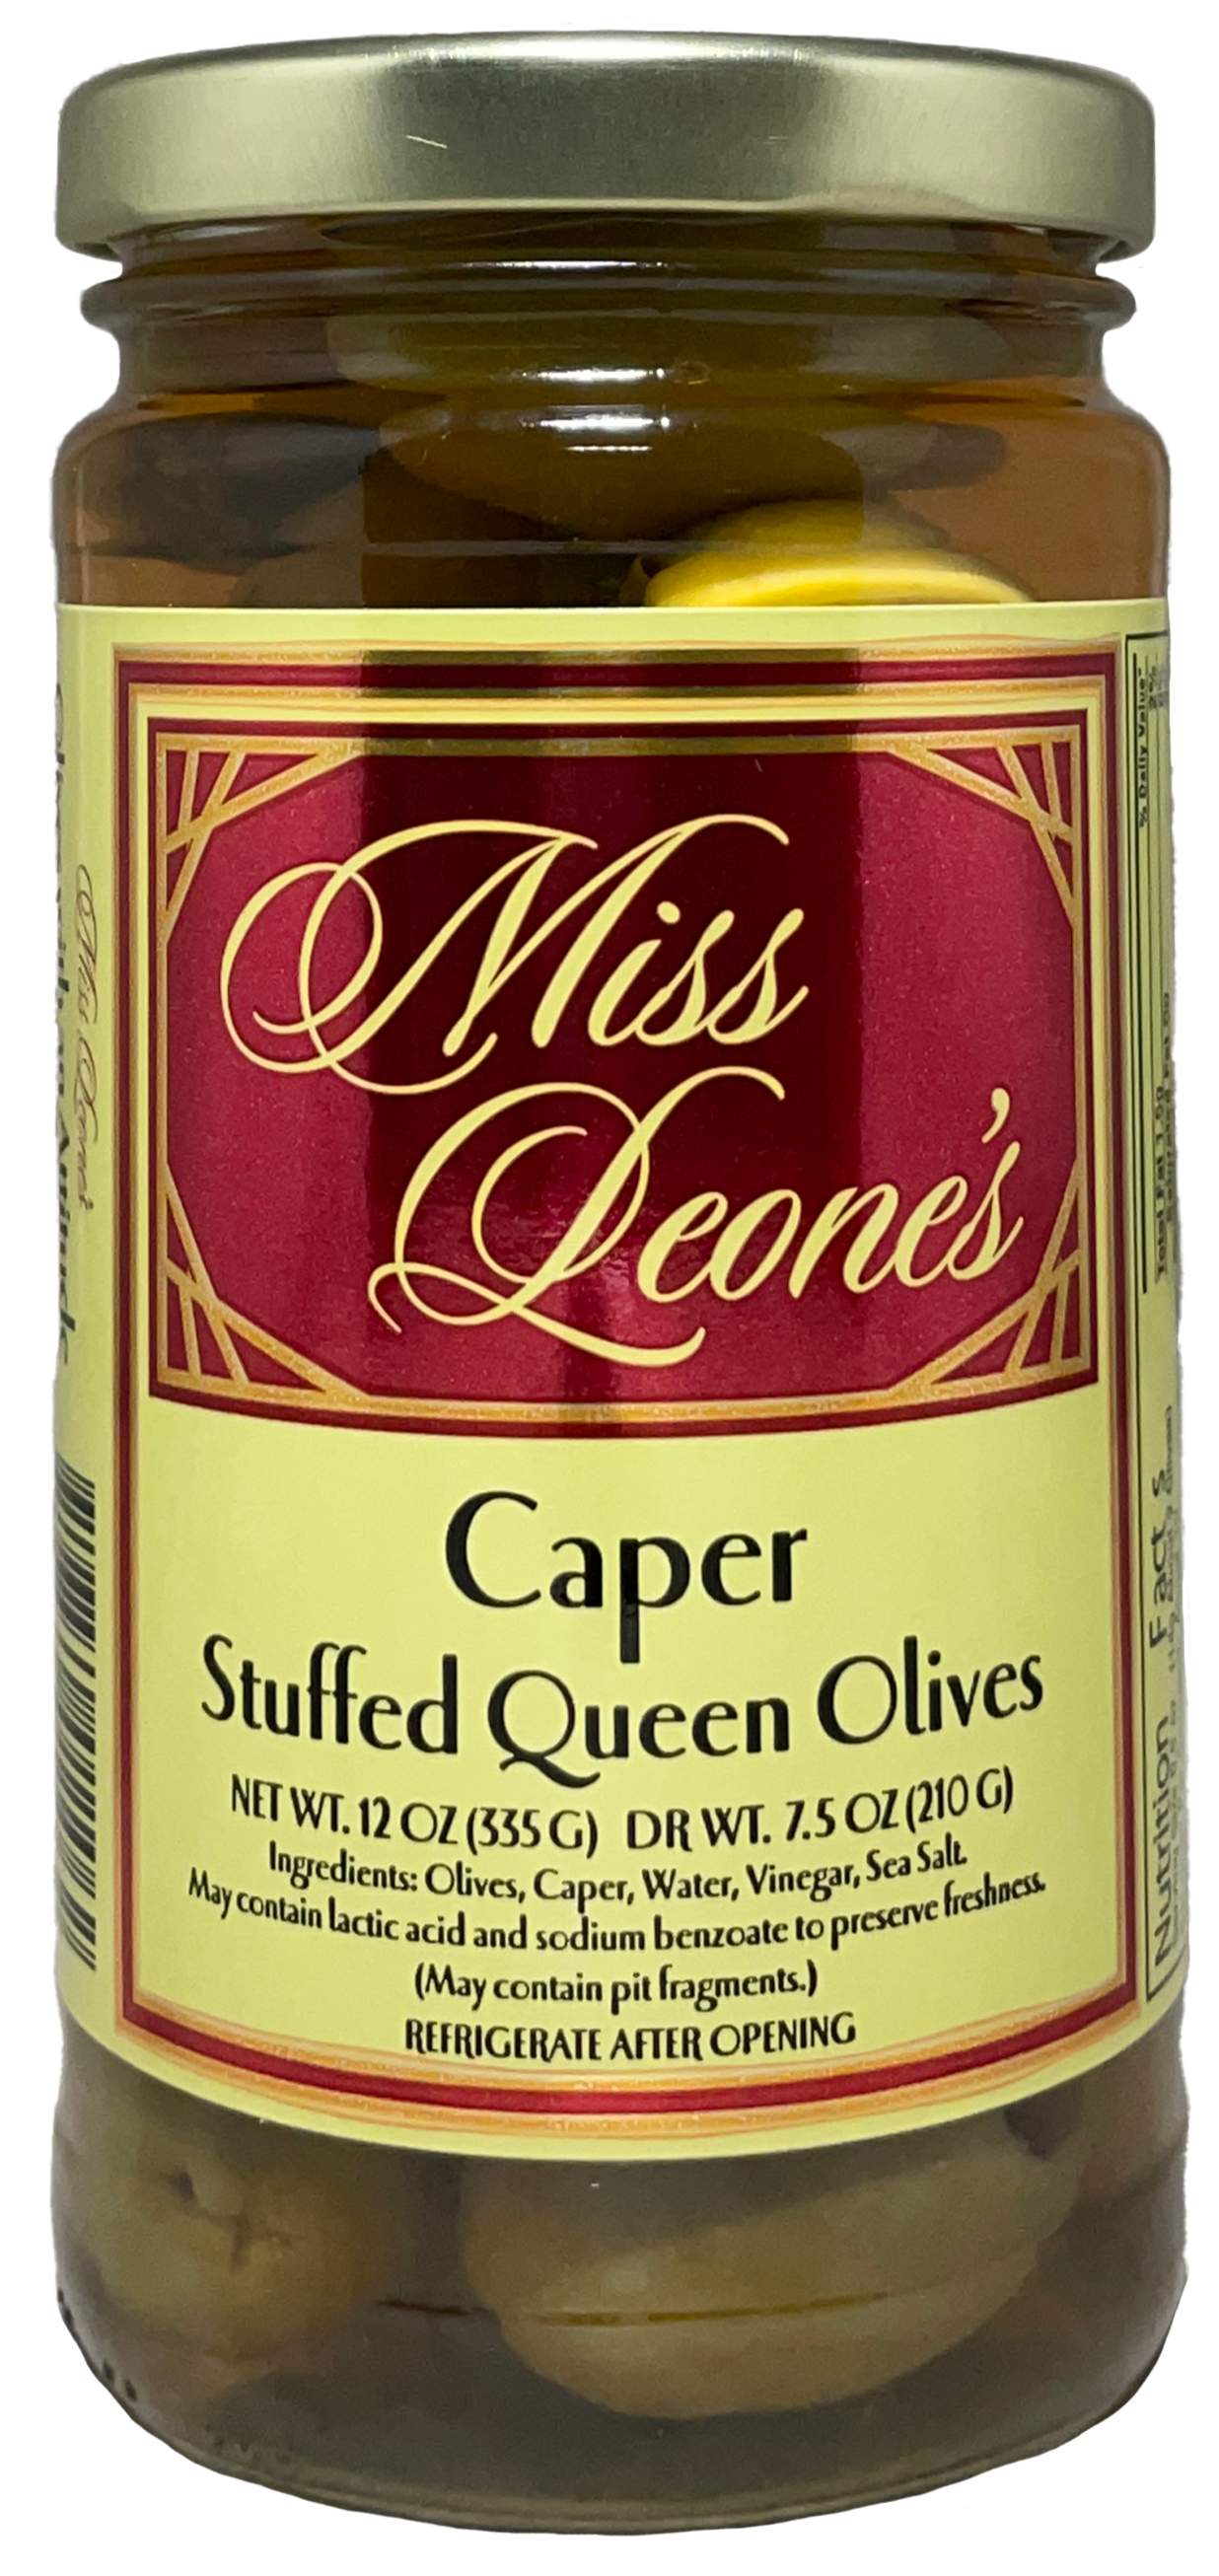 Caper Stuffed Queen Olives *NEW LOWER PRICE*